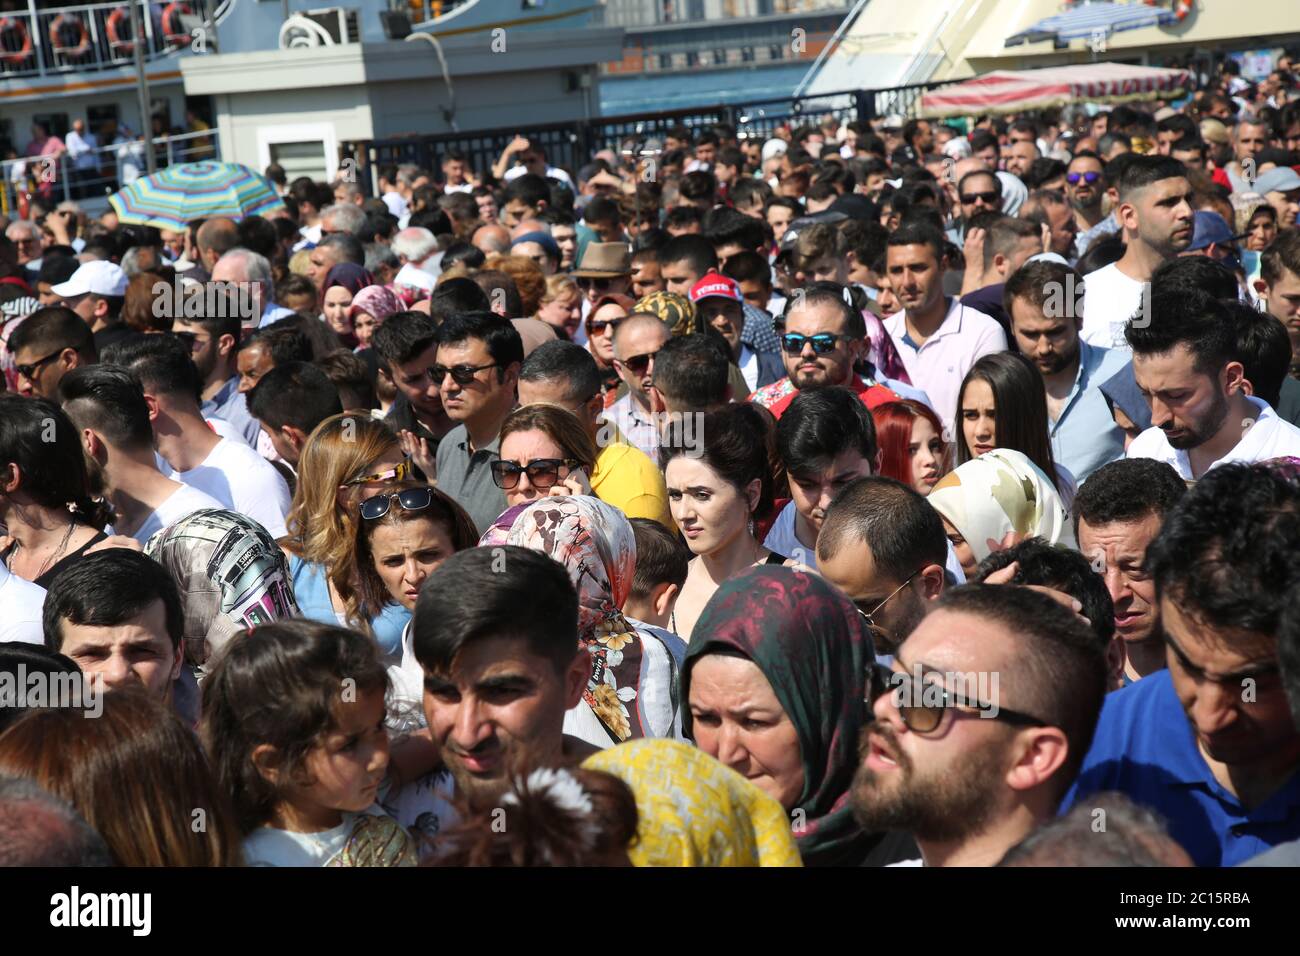 EMINONU, ISTANBUL, TURKEY; JUNE 26, 2018. People crowd walking through street. Crowds beside the Bosphorus, with mosque in background, in Istanbul. Stock Photo